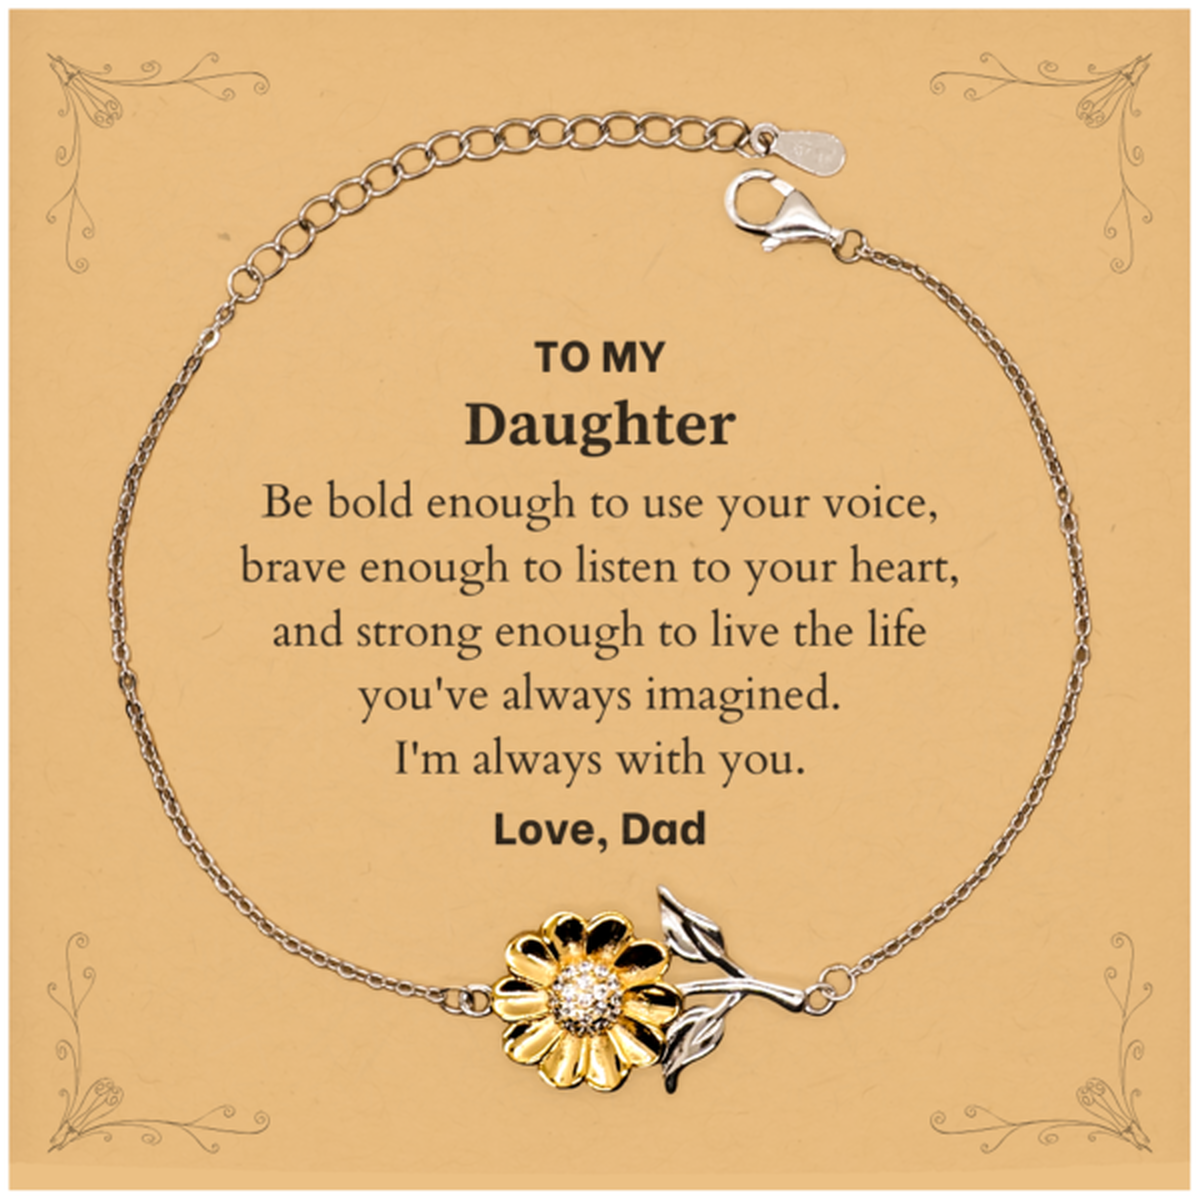 Keepsake Daughter Sunflower Bracelet Gift Idea Graduation Christmas Birthday Daughter from Dad, Daughter Be bold enough to use your voice, brave enough to listen to your heart. Love, Dad